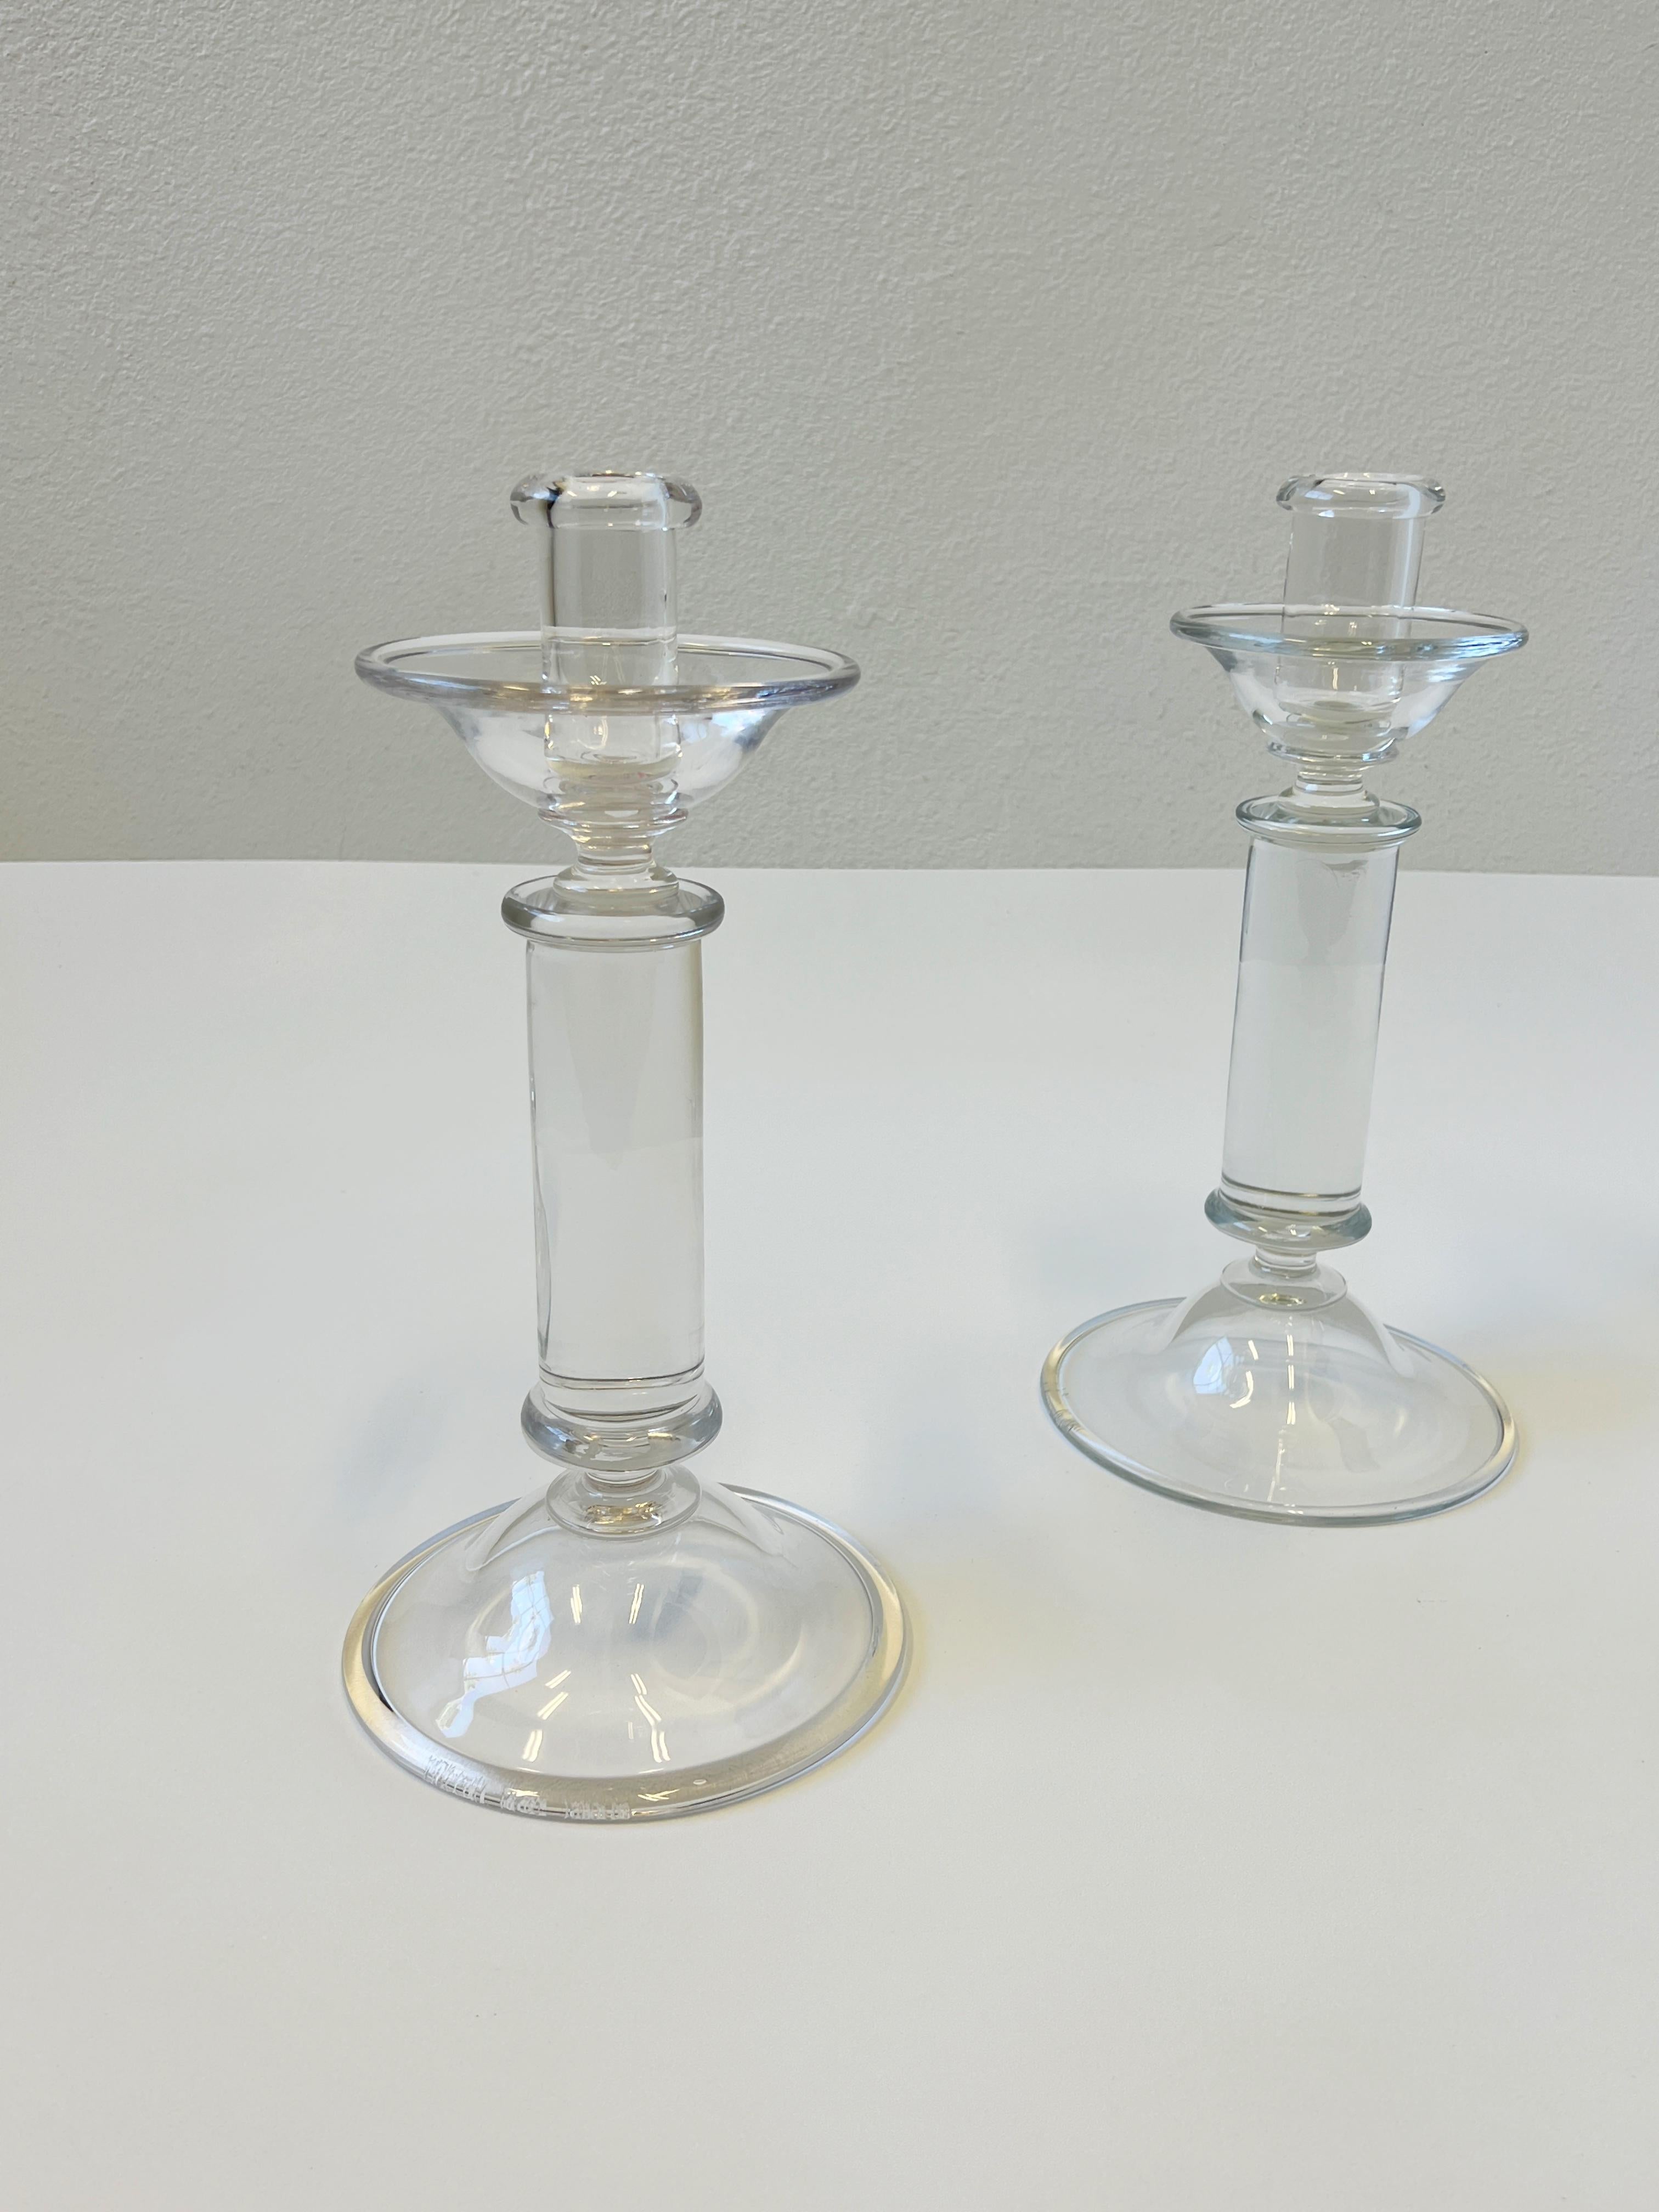 1980’s large pair of Italian clear Murano glass by Archimede Seguso. 
Both candle holders are signed ‘Archimede Seguso Murano’(see detail photos). 
Measurements: 7.75” Diameter, 13” High.